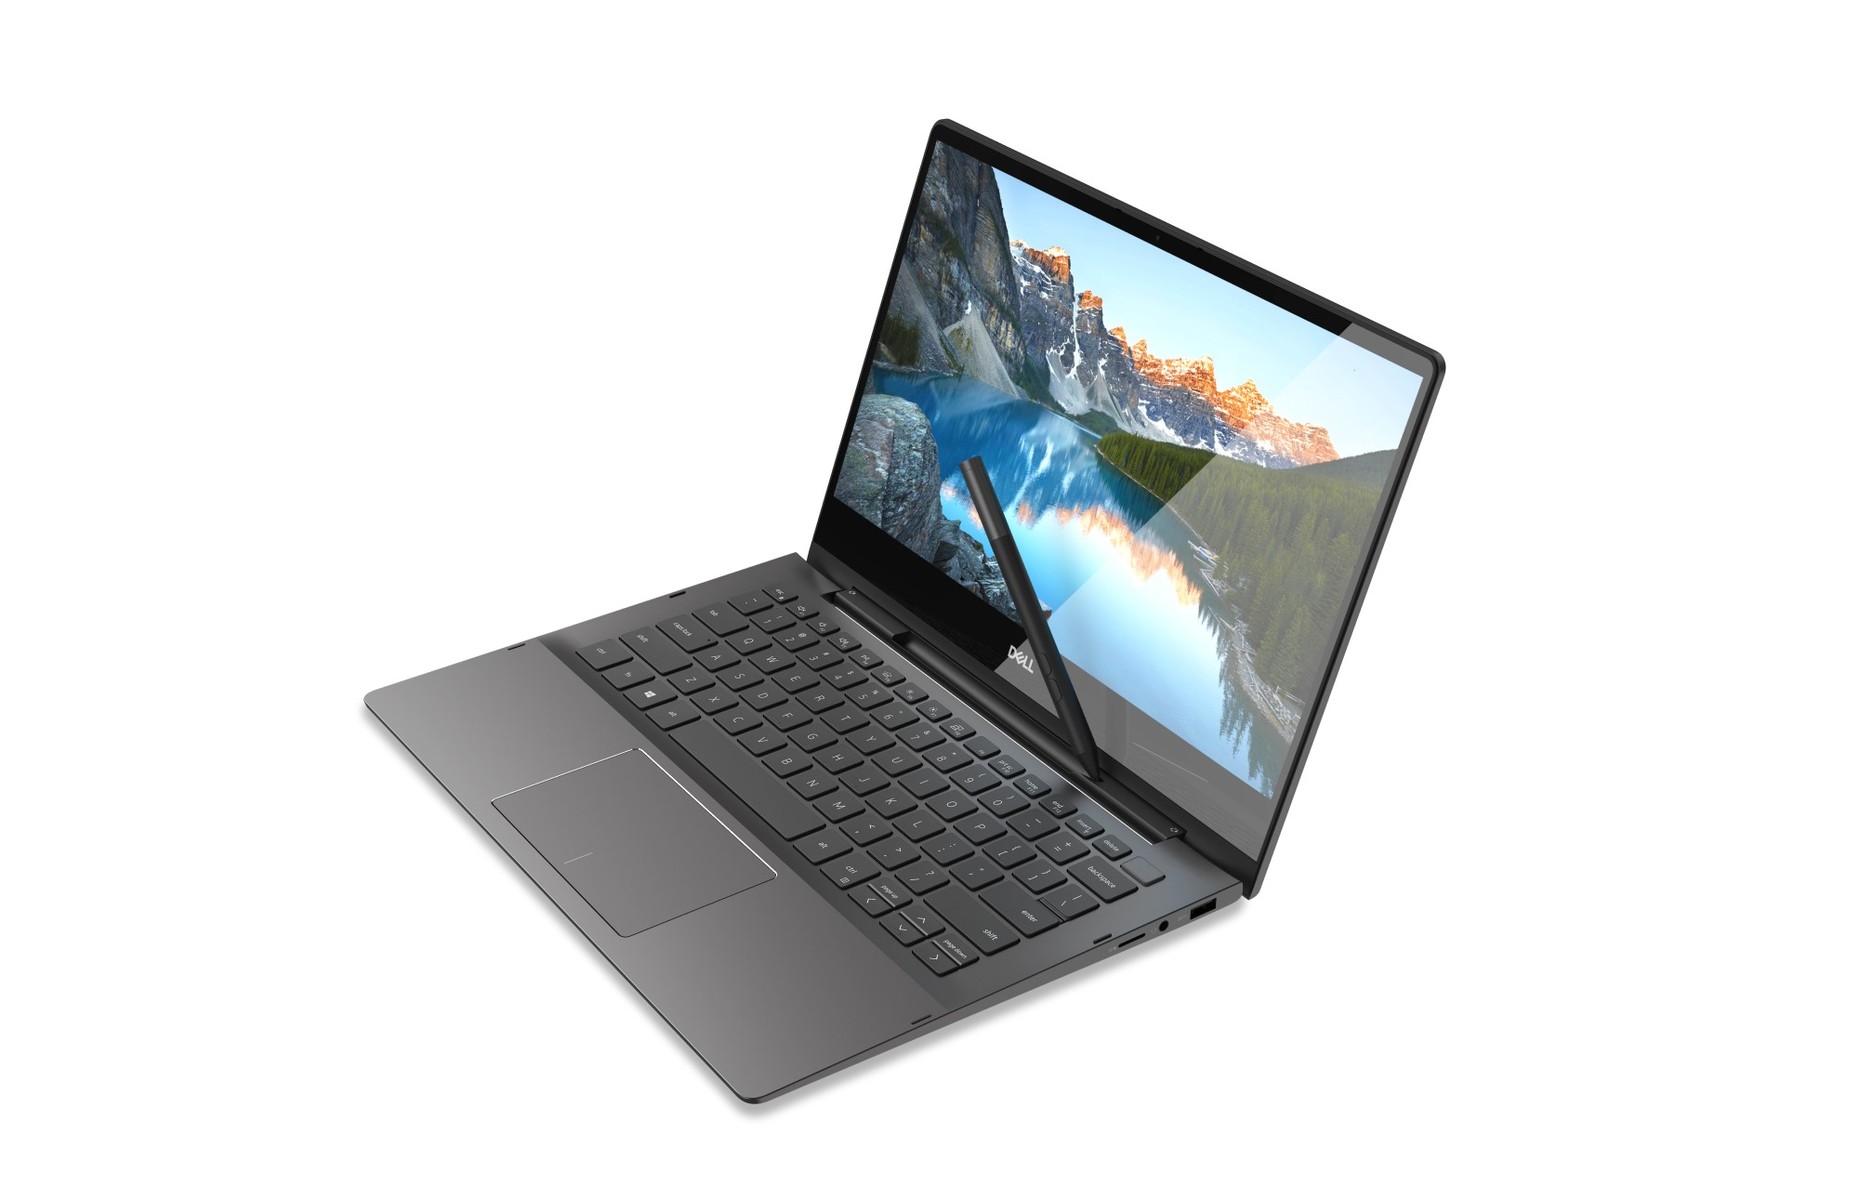 Dell updates the Inspiron 13 7000 2-in-1 and Inspiron 15 7000 2-in-1 Black Editions with new